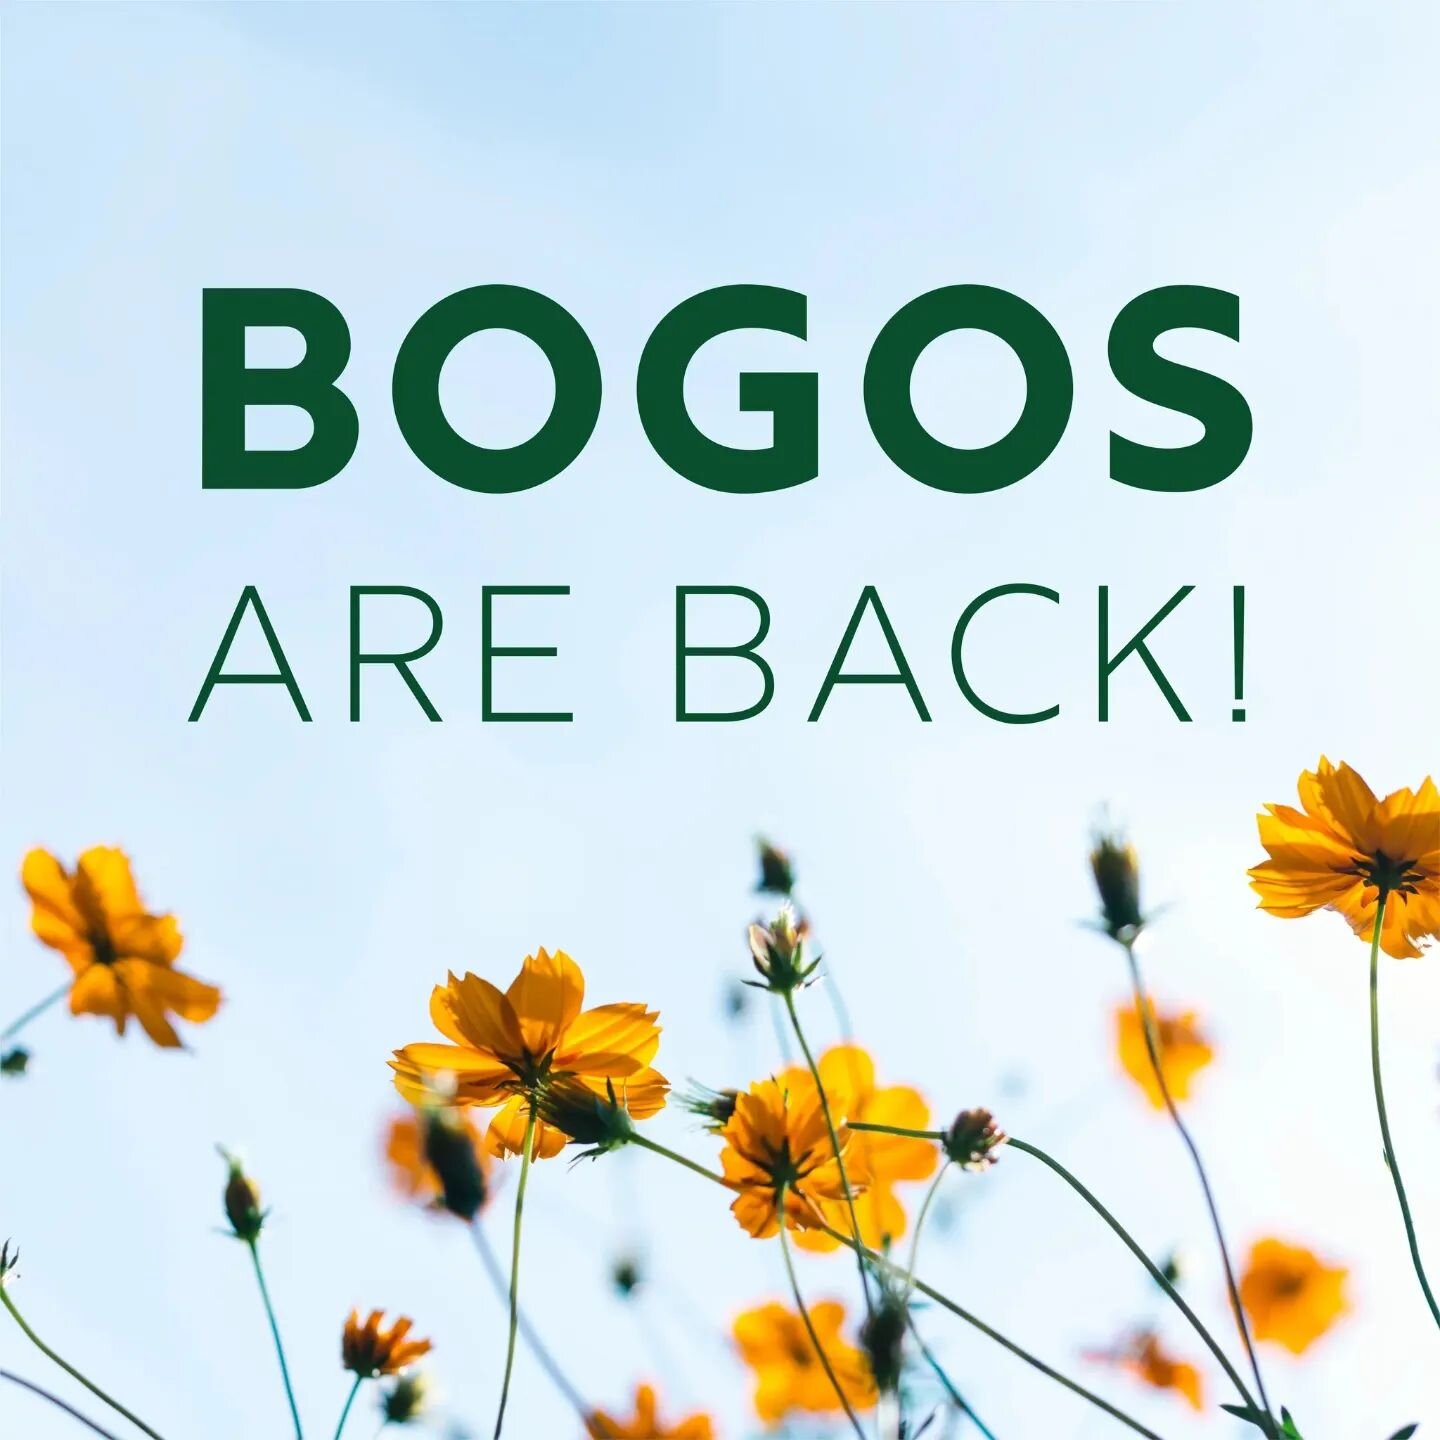 Finally, a BOGO week!! ✨️🥳✨️

Buy &bull; One &bull; Get &bull; One

Except you get so much more when you get the whole box!
☆ FREE 1yr Wholesale Membership
☆ BONUS gift Northern Escape 🌲
☆ FREE shipping

-or-

You can get the individual BOGOs  dail